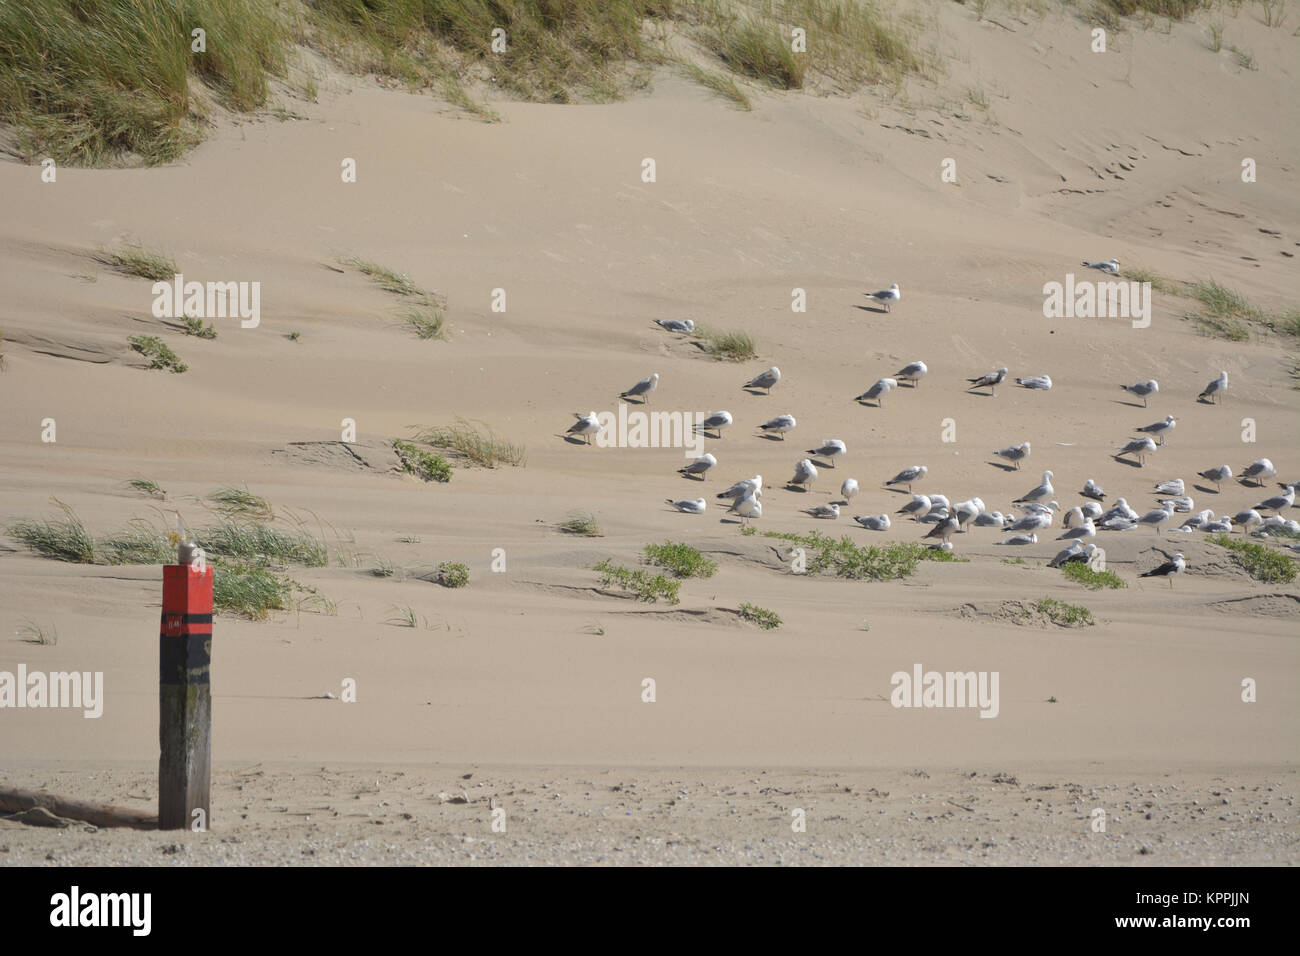 Seagulls at beach on North sea, Texel, Netherlands Stock Photo